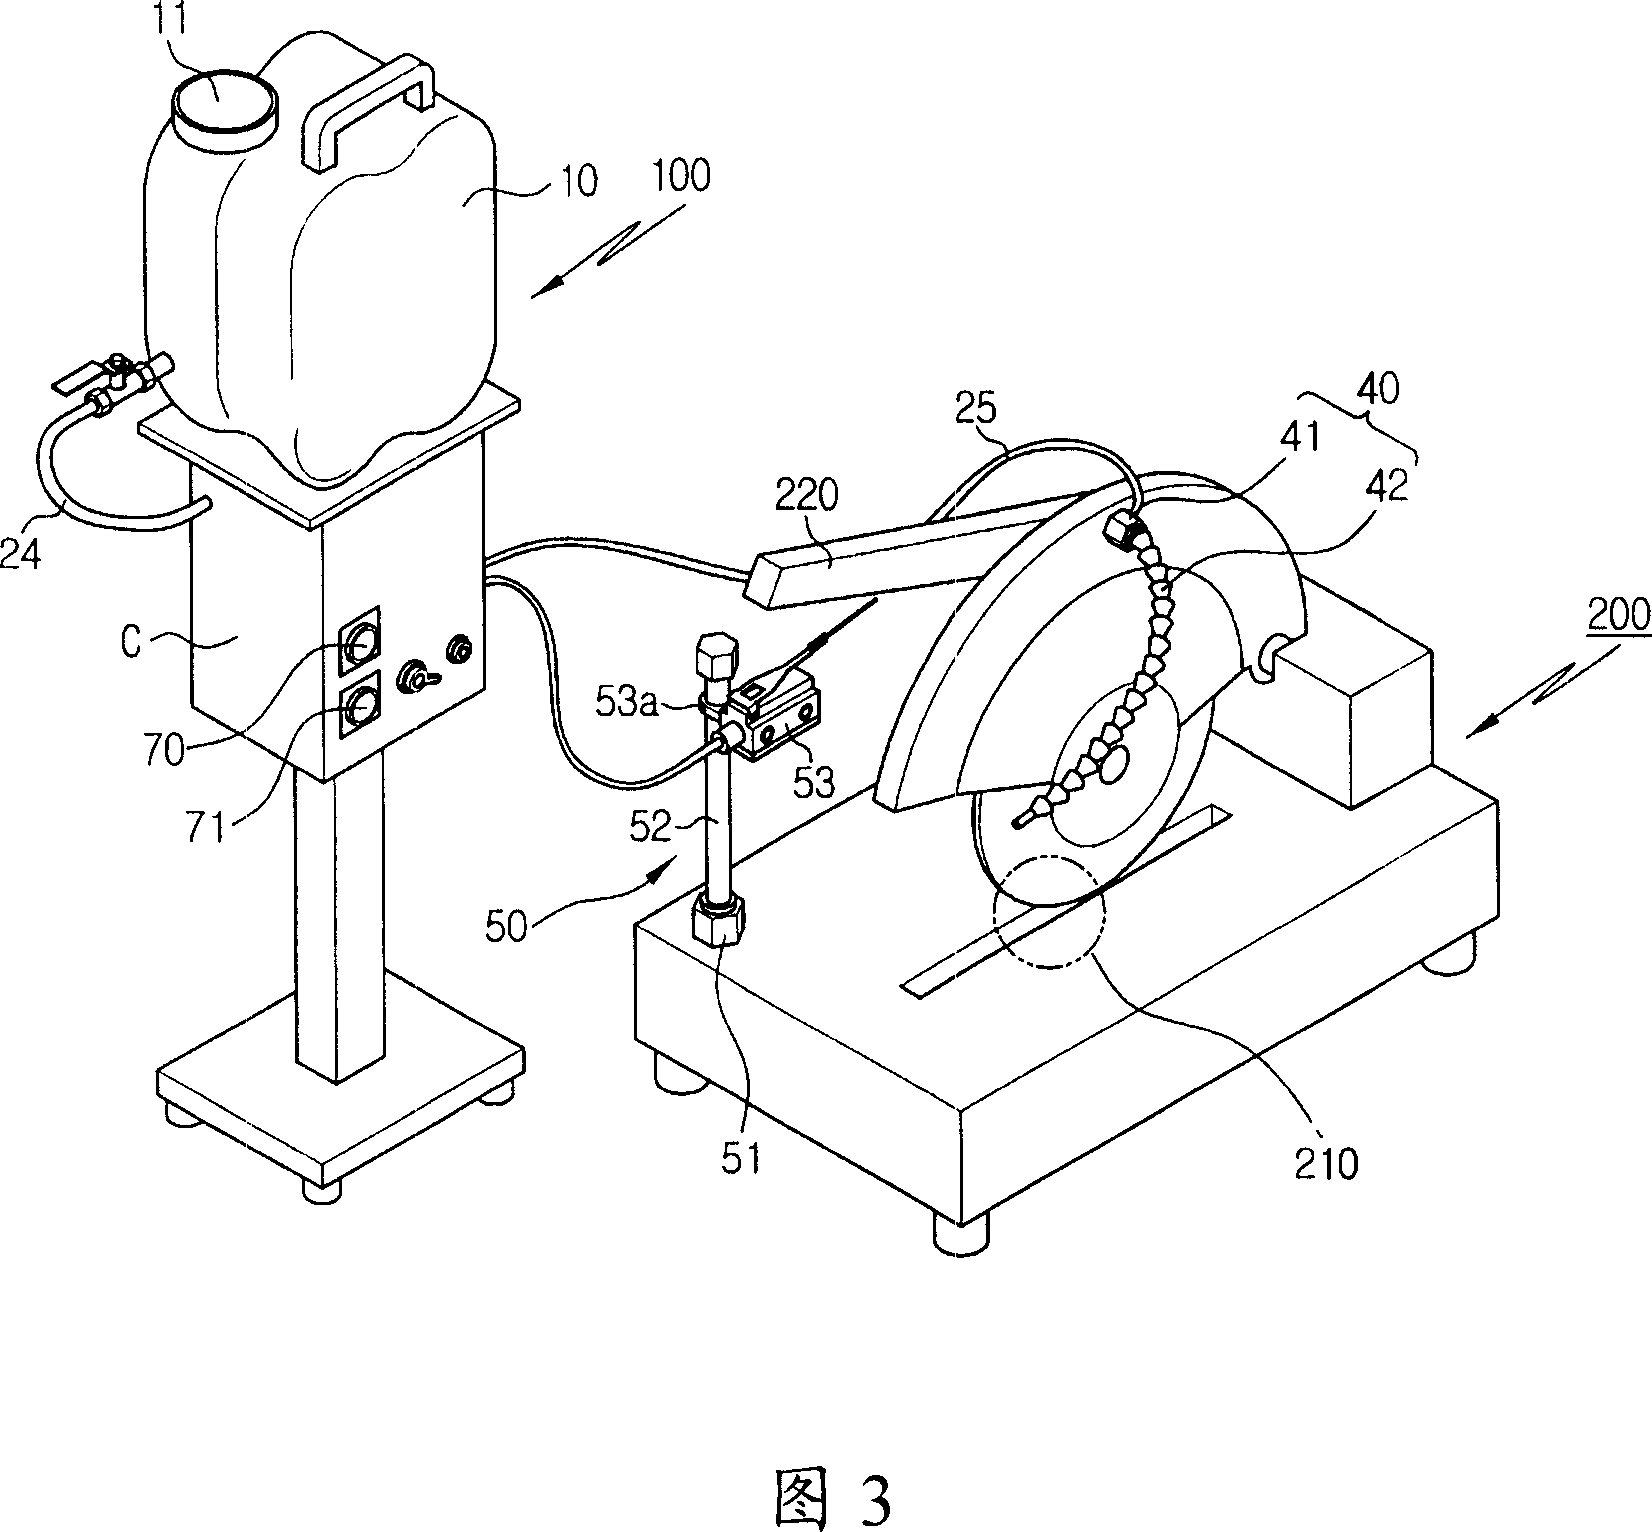 A portable apparatus for suppling cutting oil